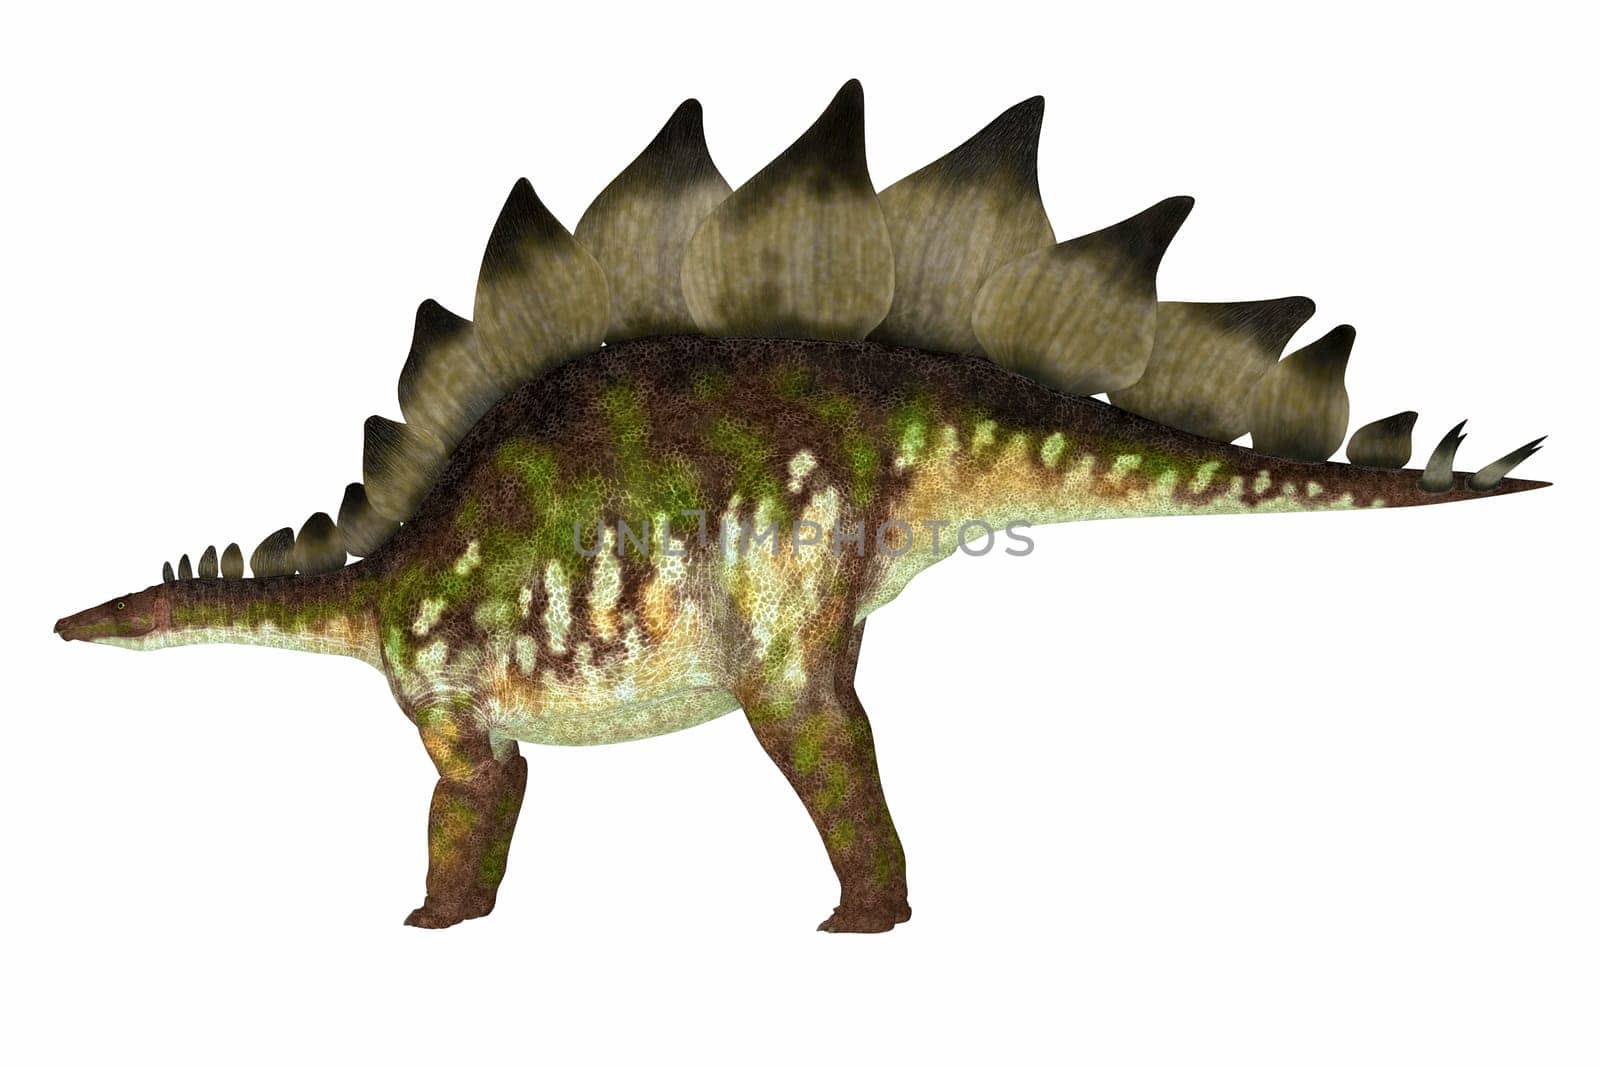 Stegosaurus was an armored herbivorous dinosaur that lived in North America during the Jurassic Period.